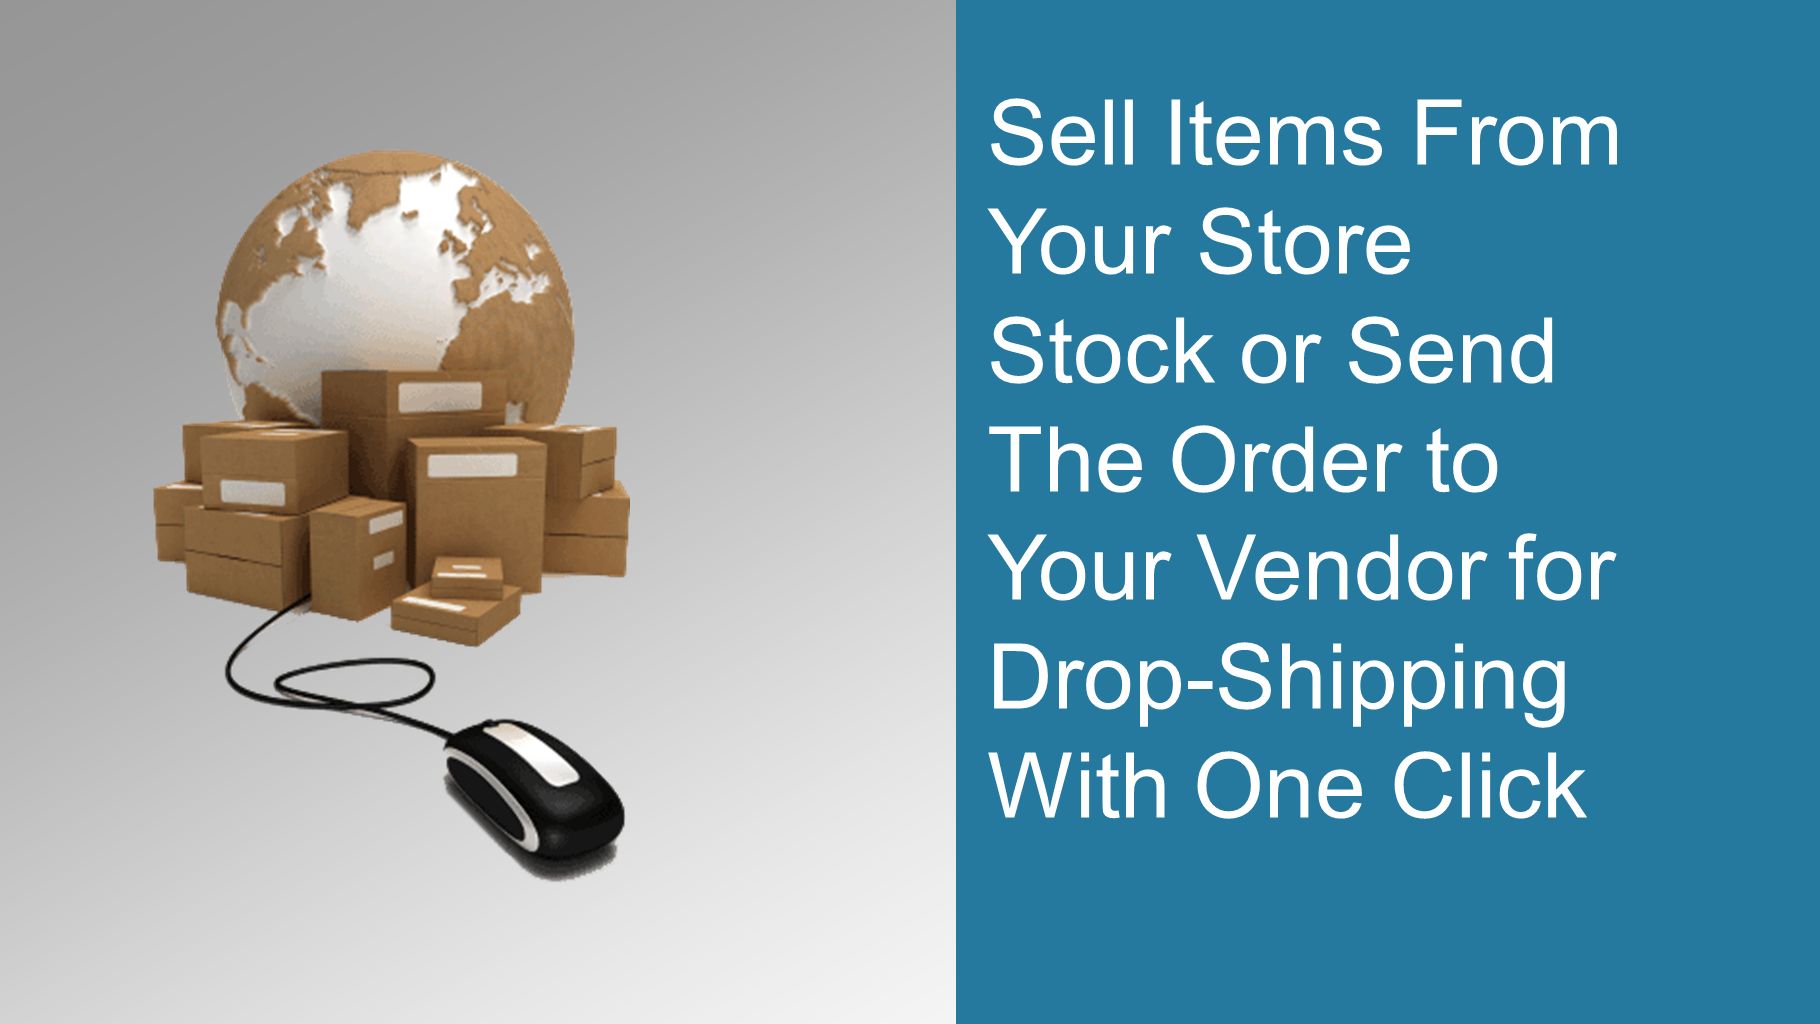 Sell Items From Your Store Stock or Send The Order to Your Vendor for Drop-Shipping With One Click